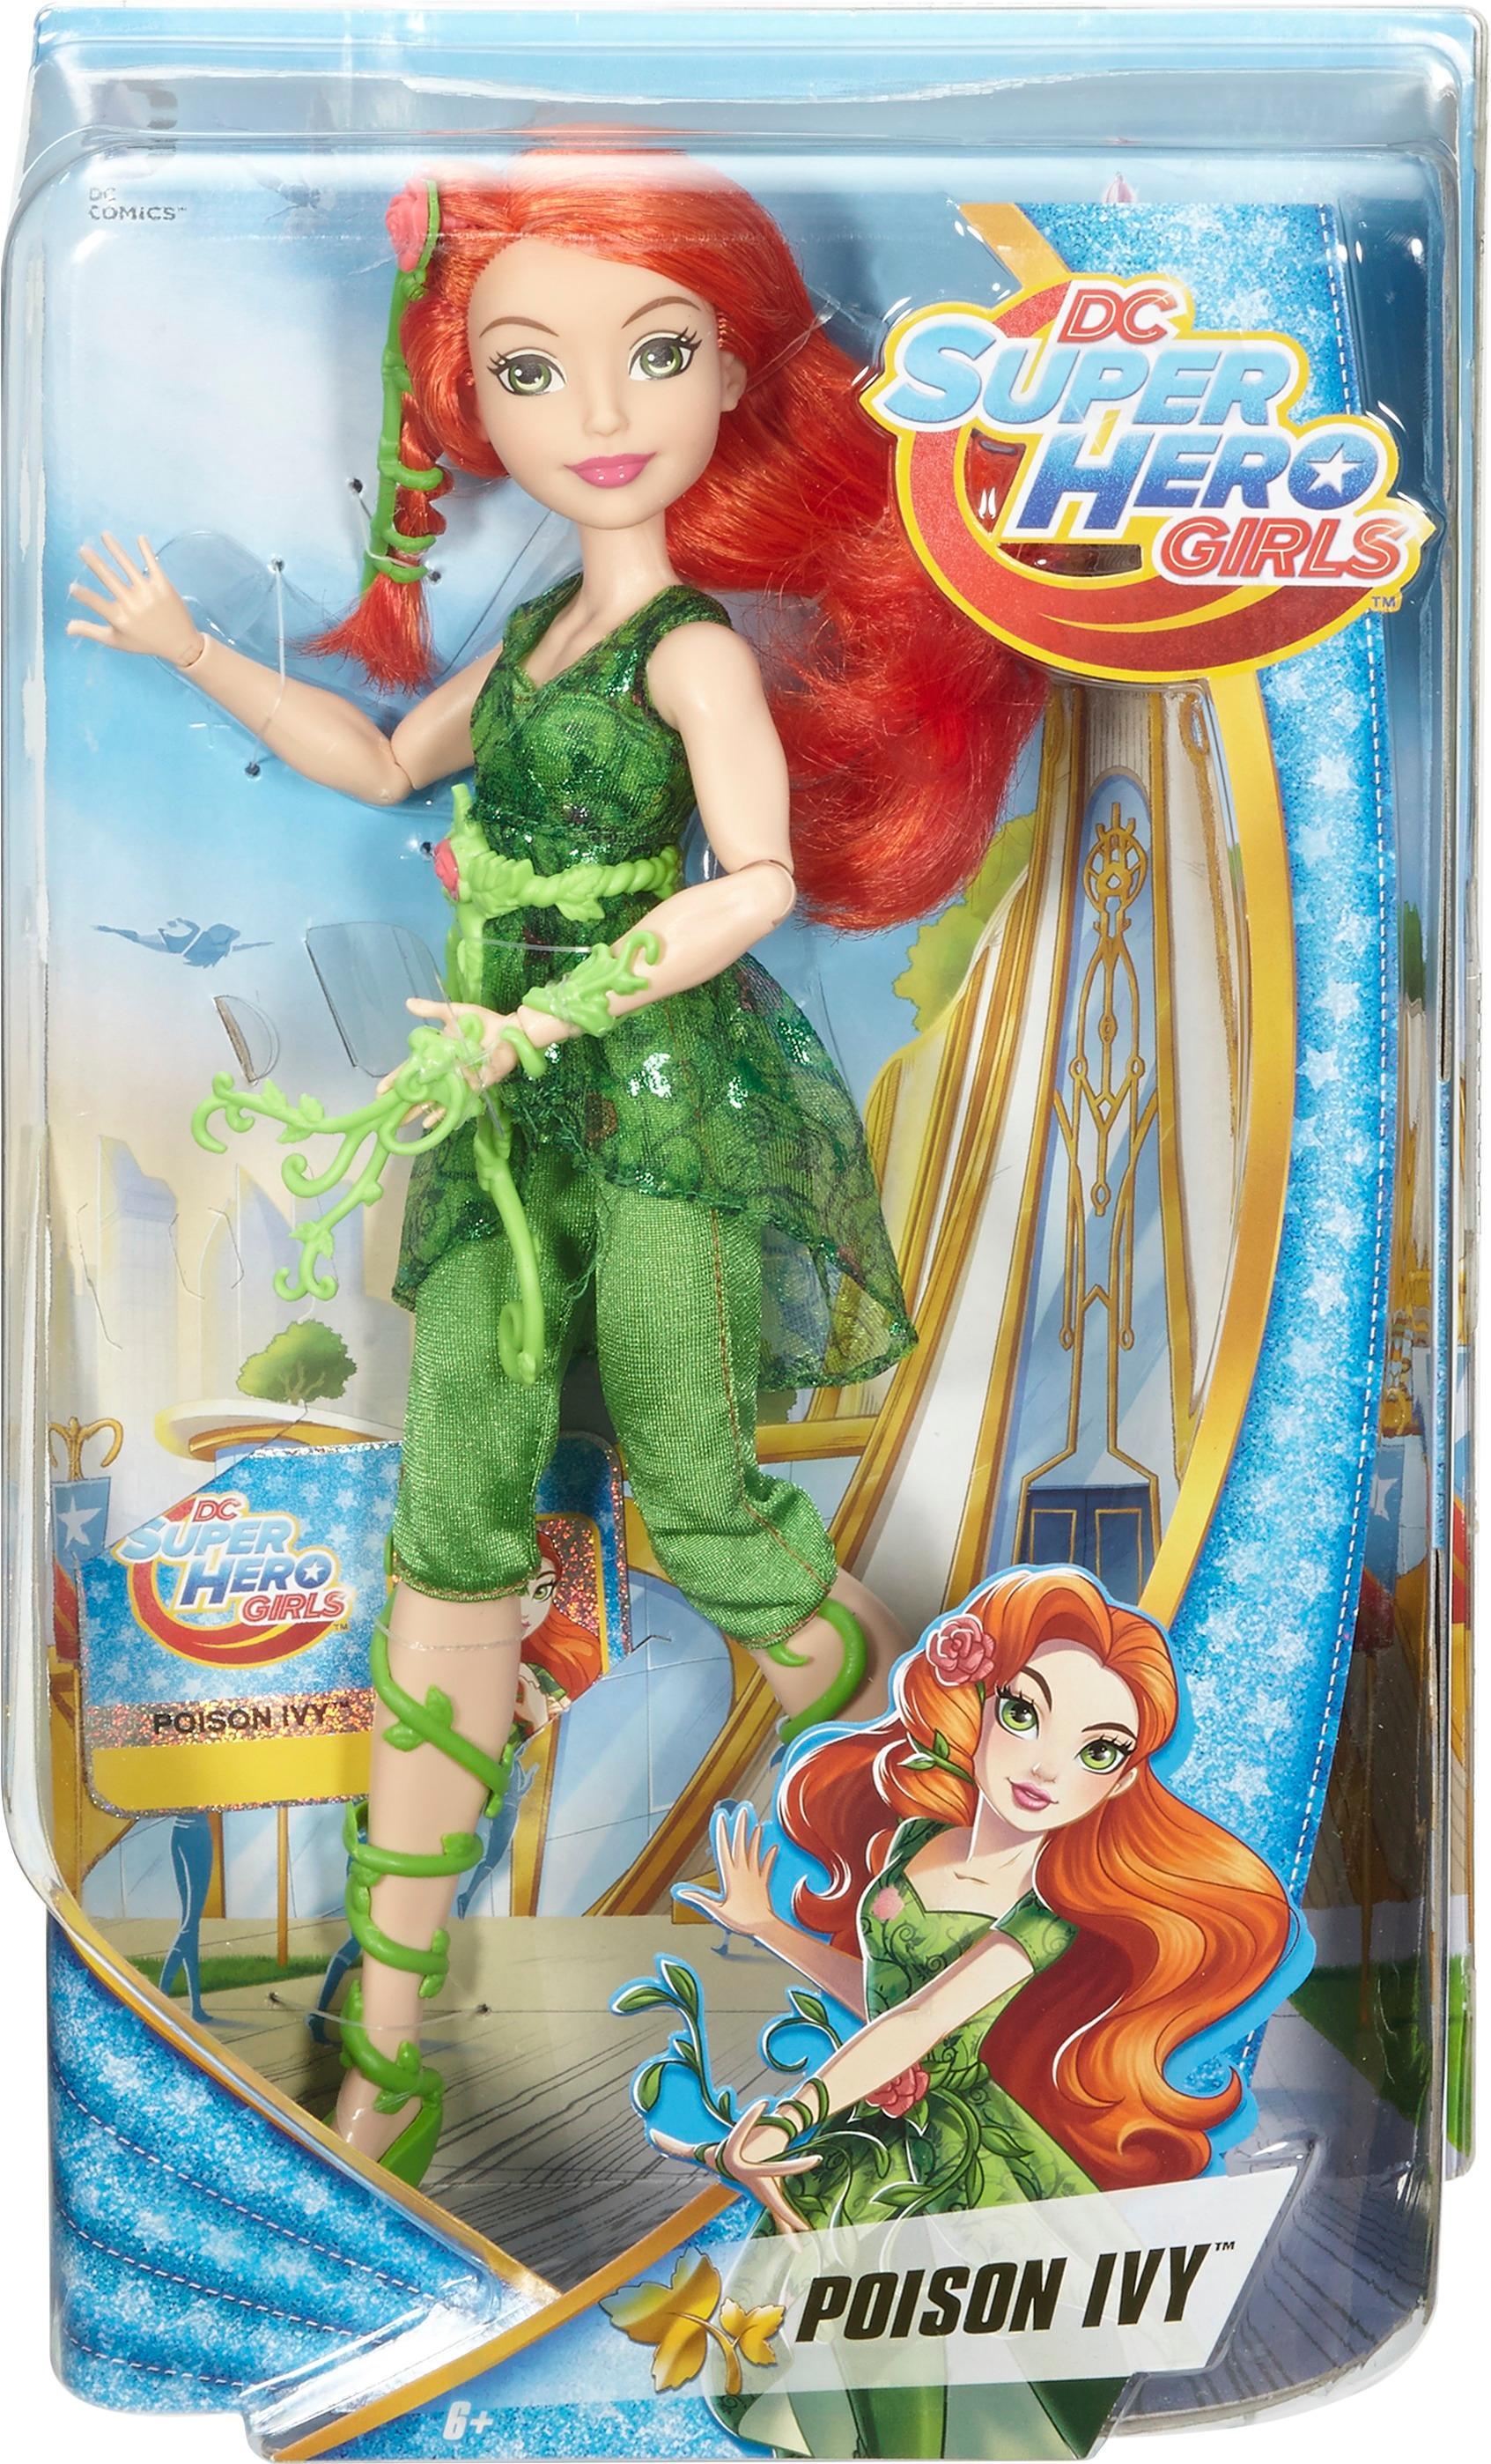 DC Super Hero Girls Poison Ivy 12 inch Action Figure Doll New Comics Mattel Toy 